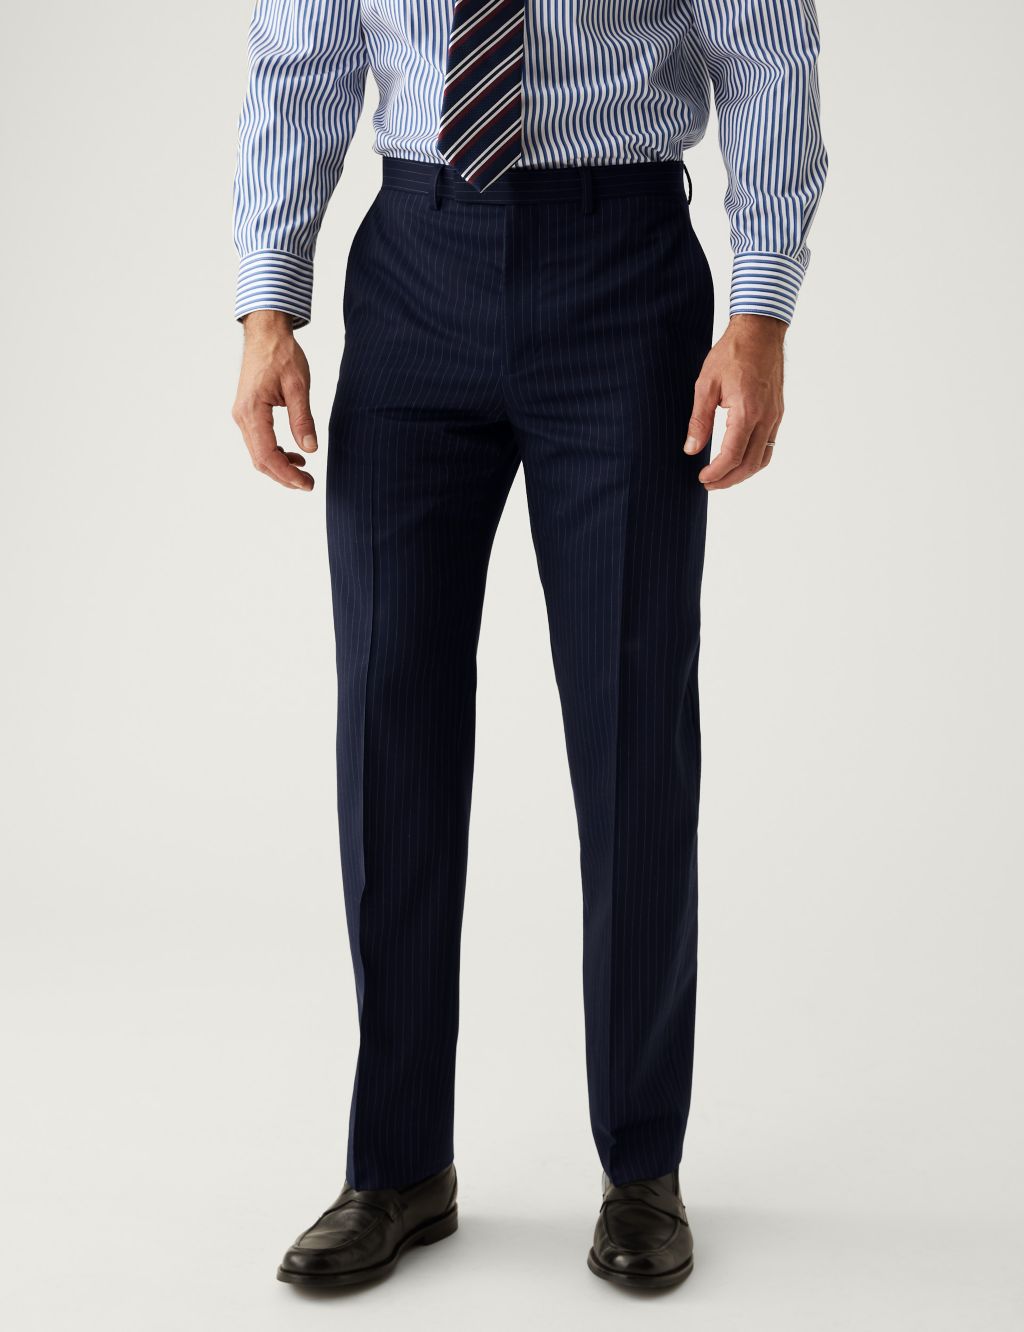 Regular Fit Wool Rich Pinstripe Suit Trousers image 2